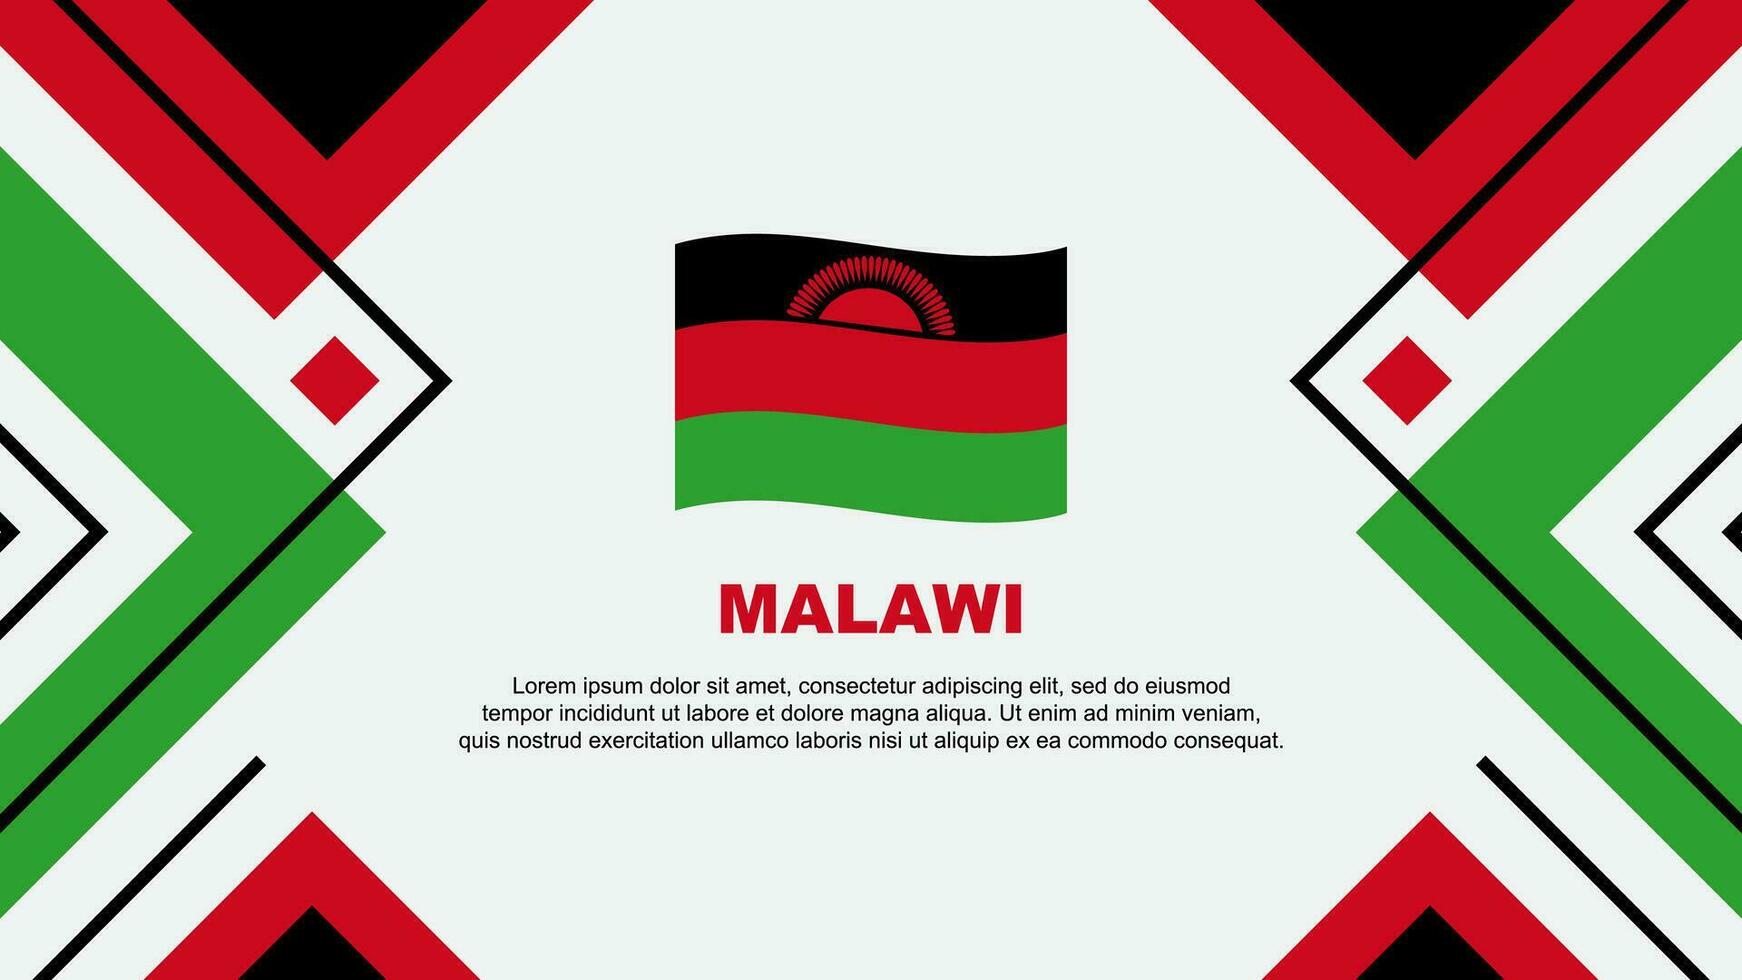 Malawi Flag Abstract Background Design Template. Malawi Independence Day Banner Wallpaper Vector Illustration. Malawi Illustration